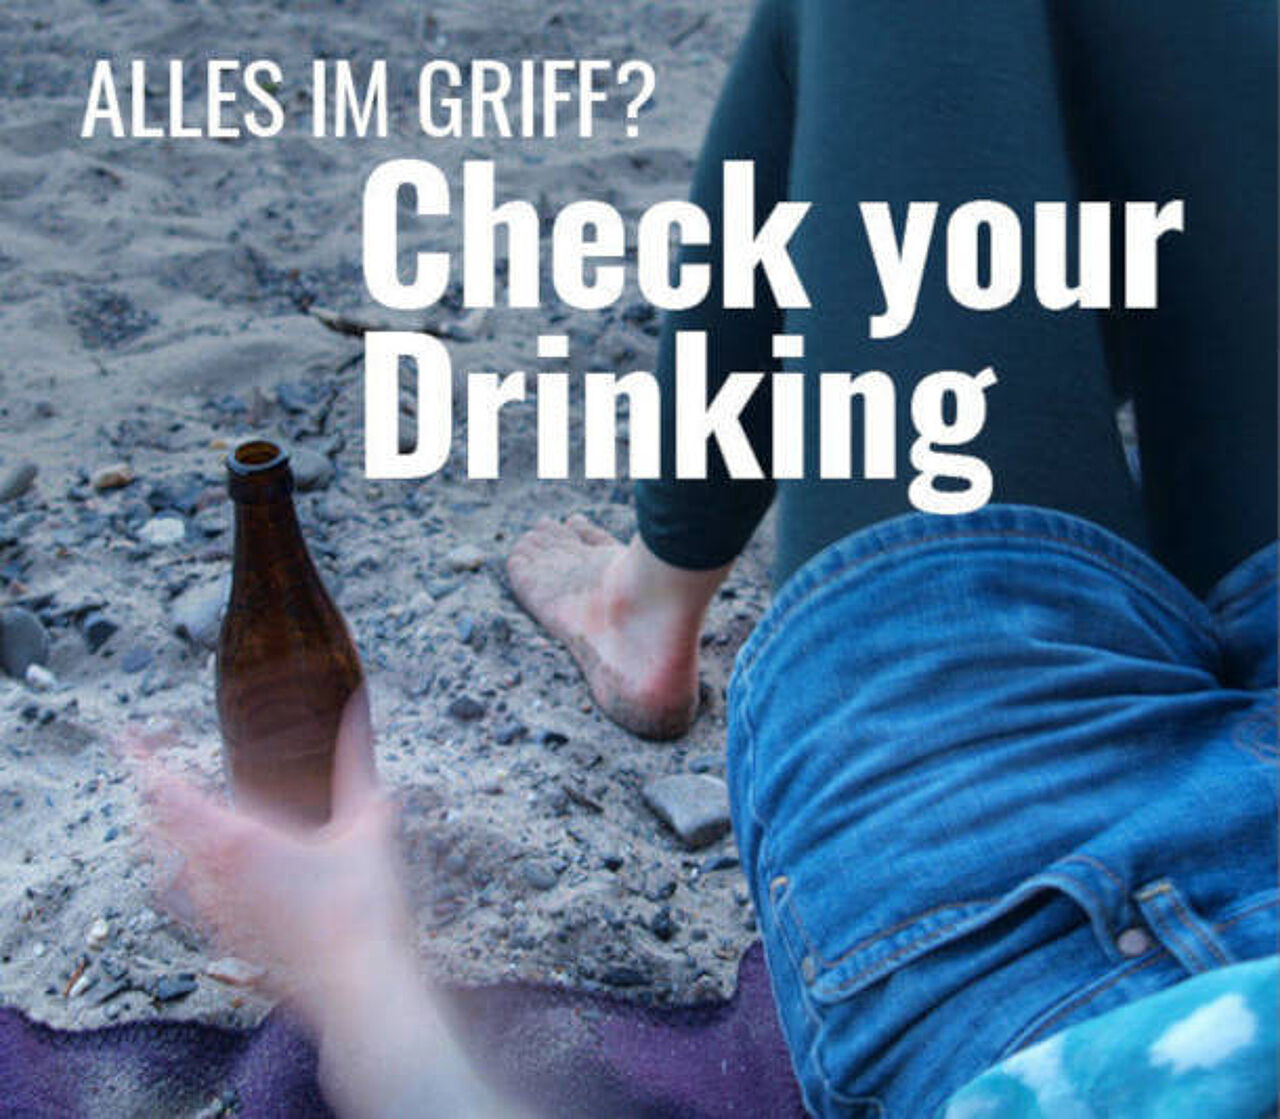 Banner "Alles im Griff Check your Drinking"